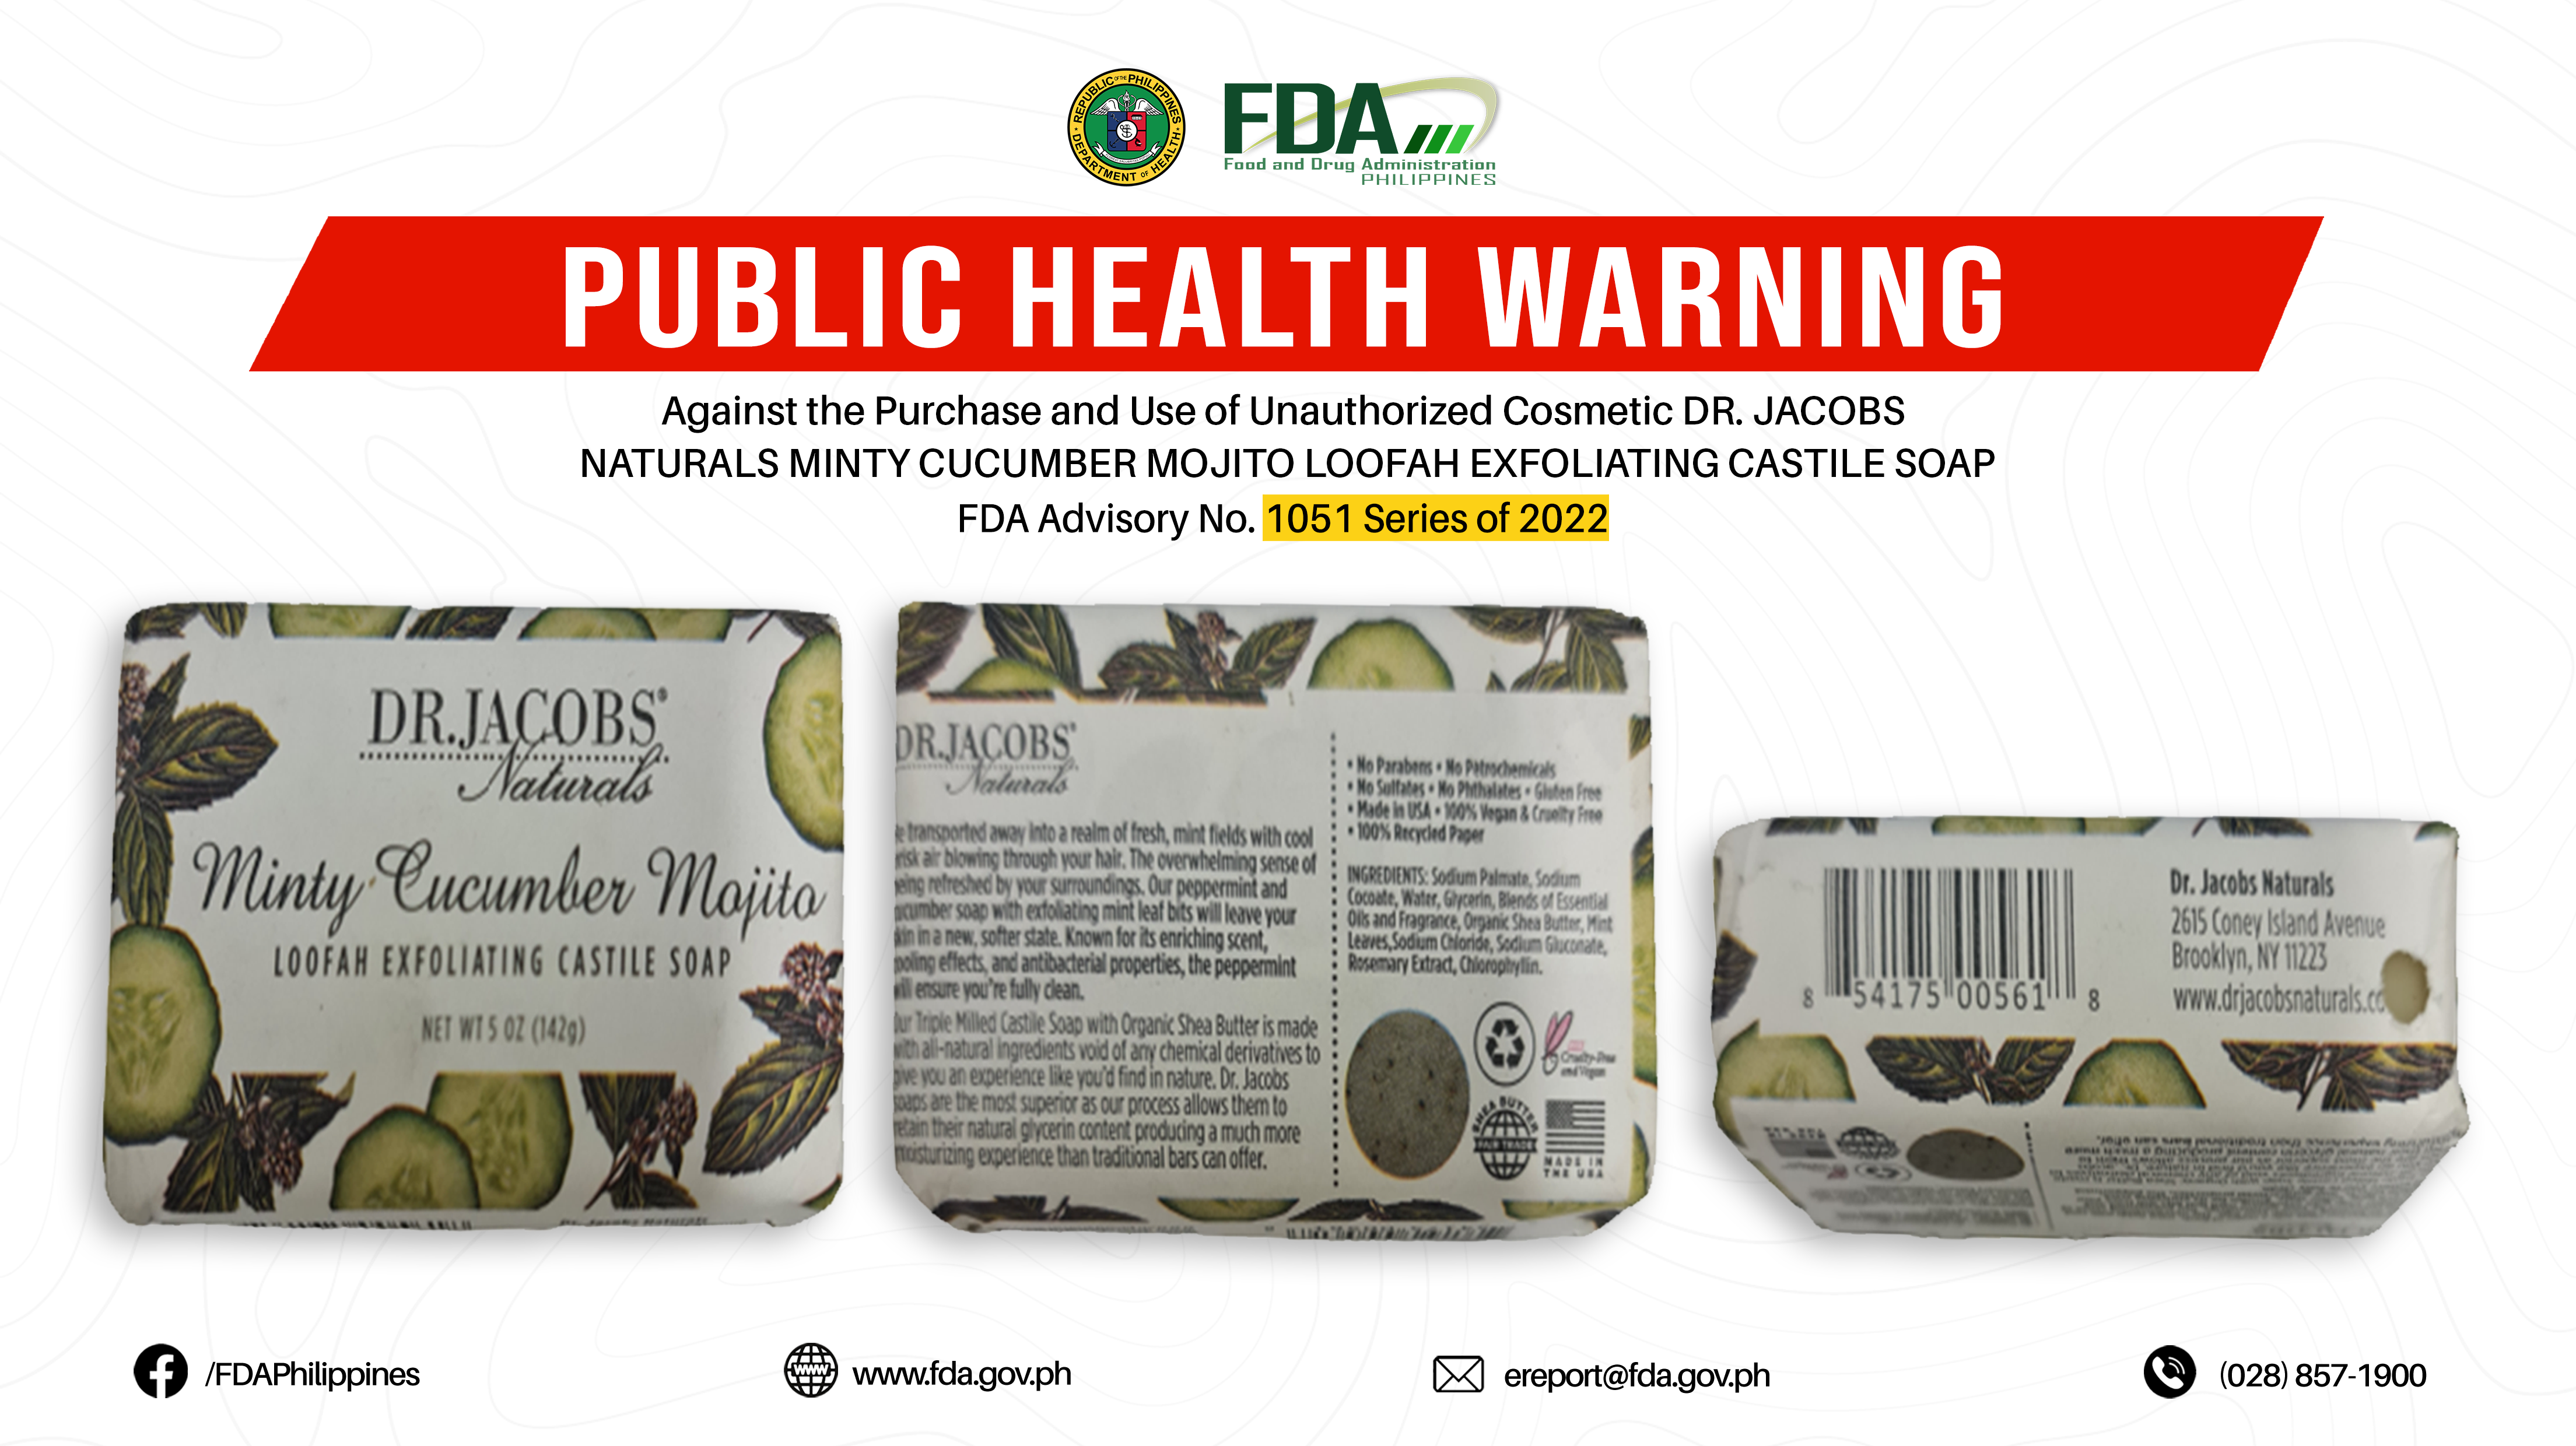 FDA Advisory No.2022-1051 || Public Health Warning Against the Purchase and Use of Unauthorized Cosmetic DR. JACOBS NATURALS MINTY CUCUMBER MOJITO LOOFAH EXFOLIATING CASTILE SOAP